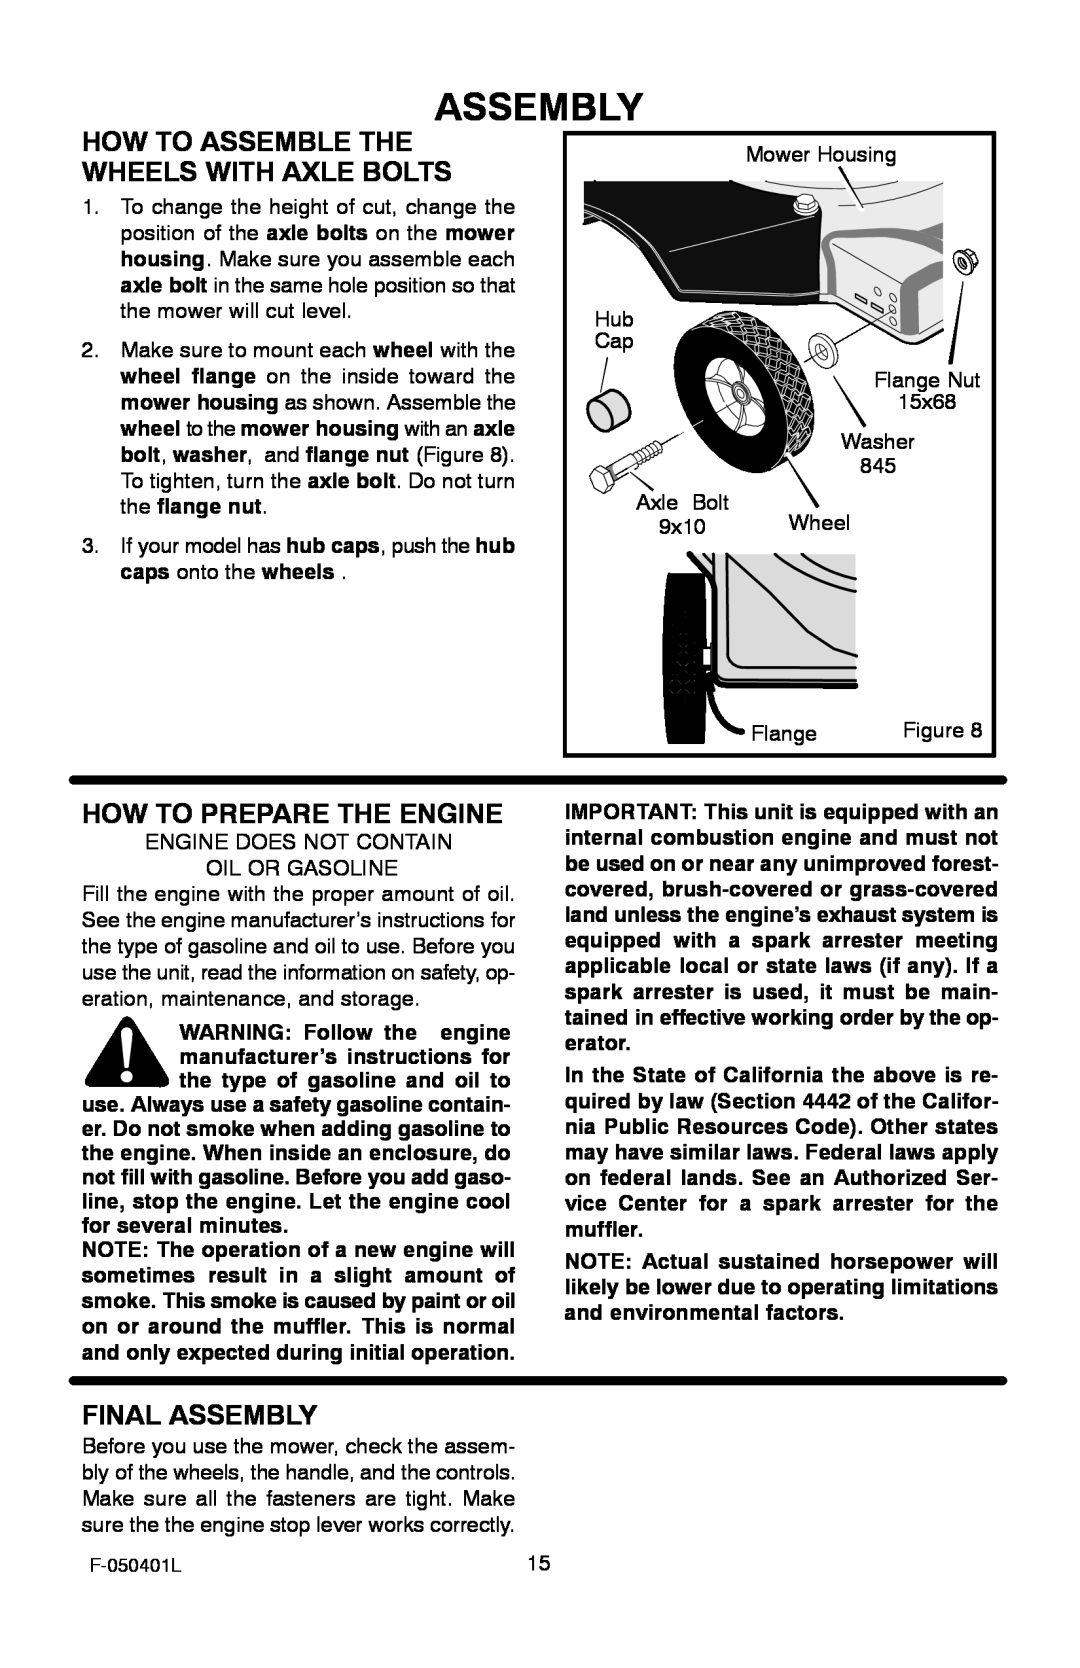 Murray 20-inch Push manual How To Assemble The Wheels With Axle Bolts, How To Prepare The Engine, Final Assembly 